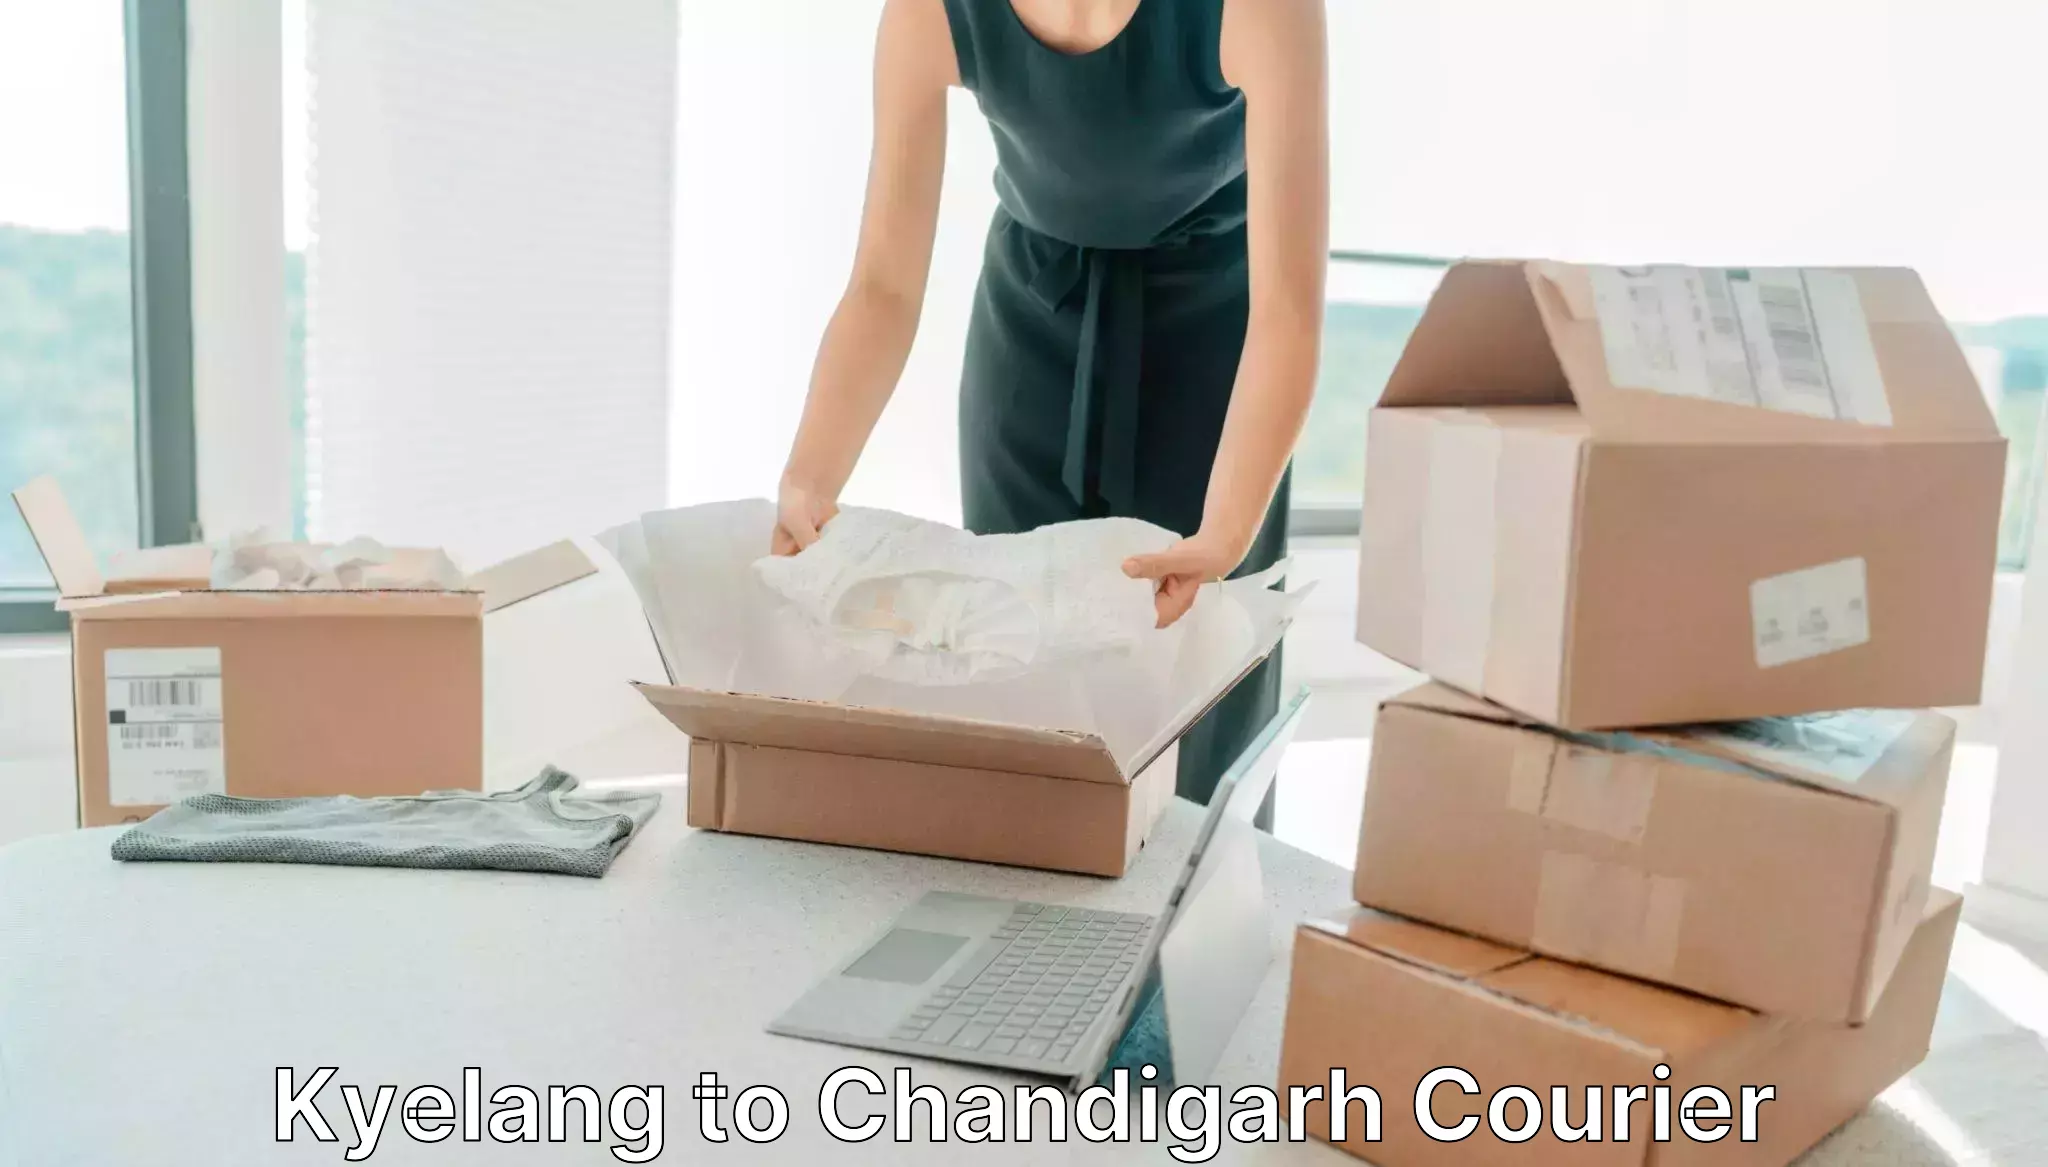 Same-day delivery solutions Kyelang to Chandigarh